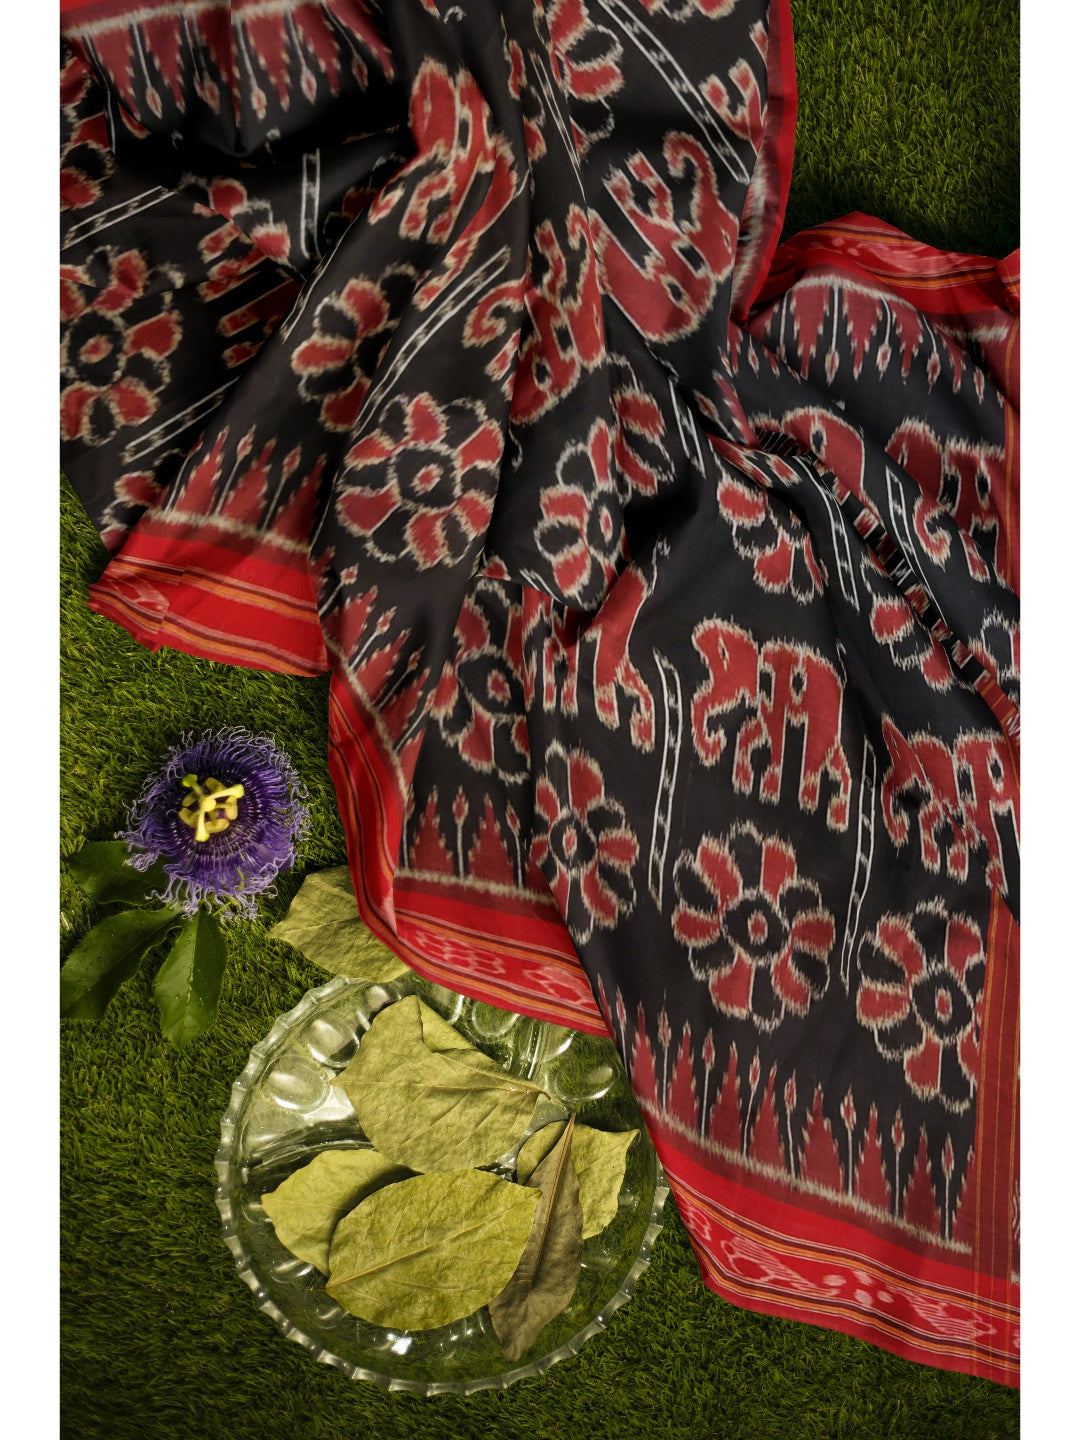 Black and Red Cotton ikat Dupatta with elephant and flower motifs woven